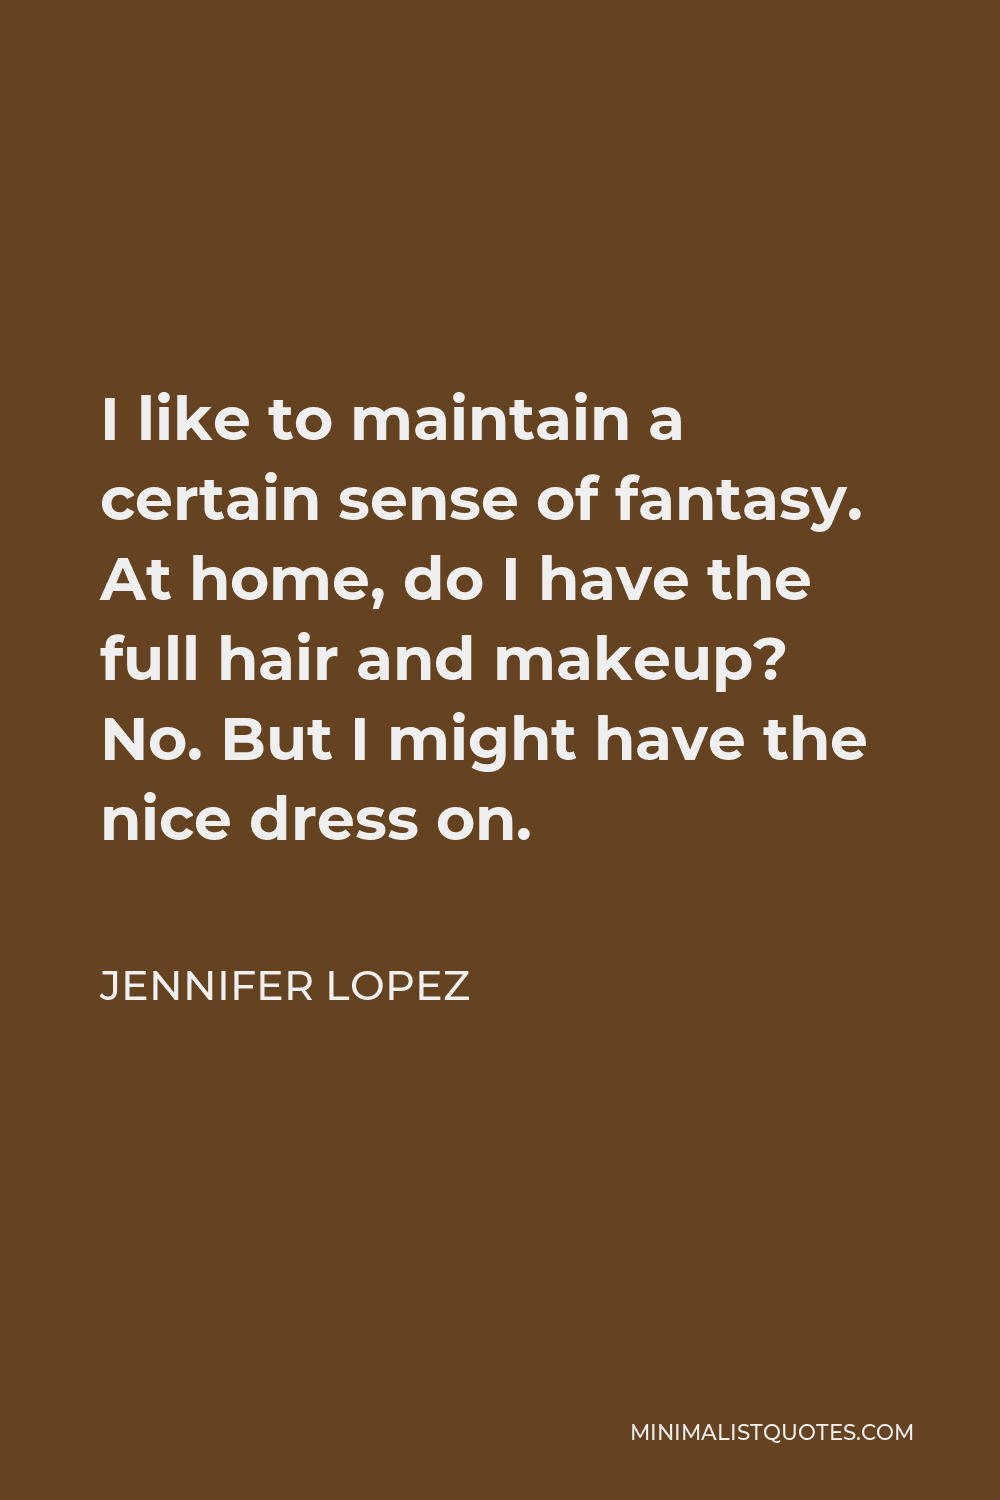 Jennifer Lopez Quote - I like to maintain a certain sense of fantasy in my life.